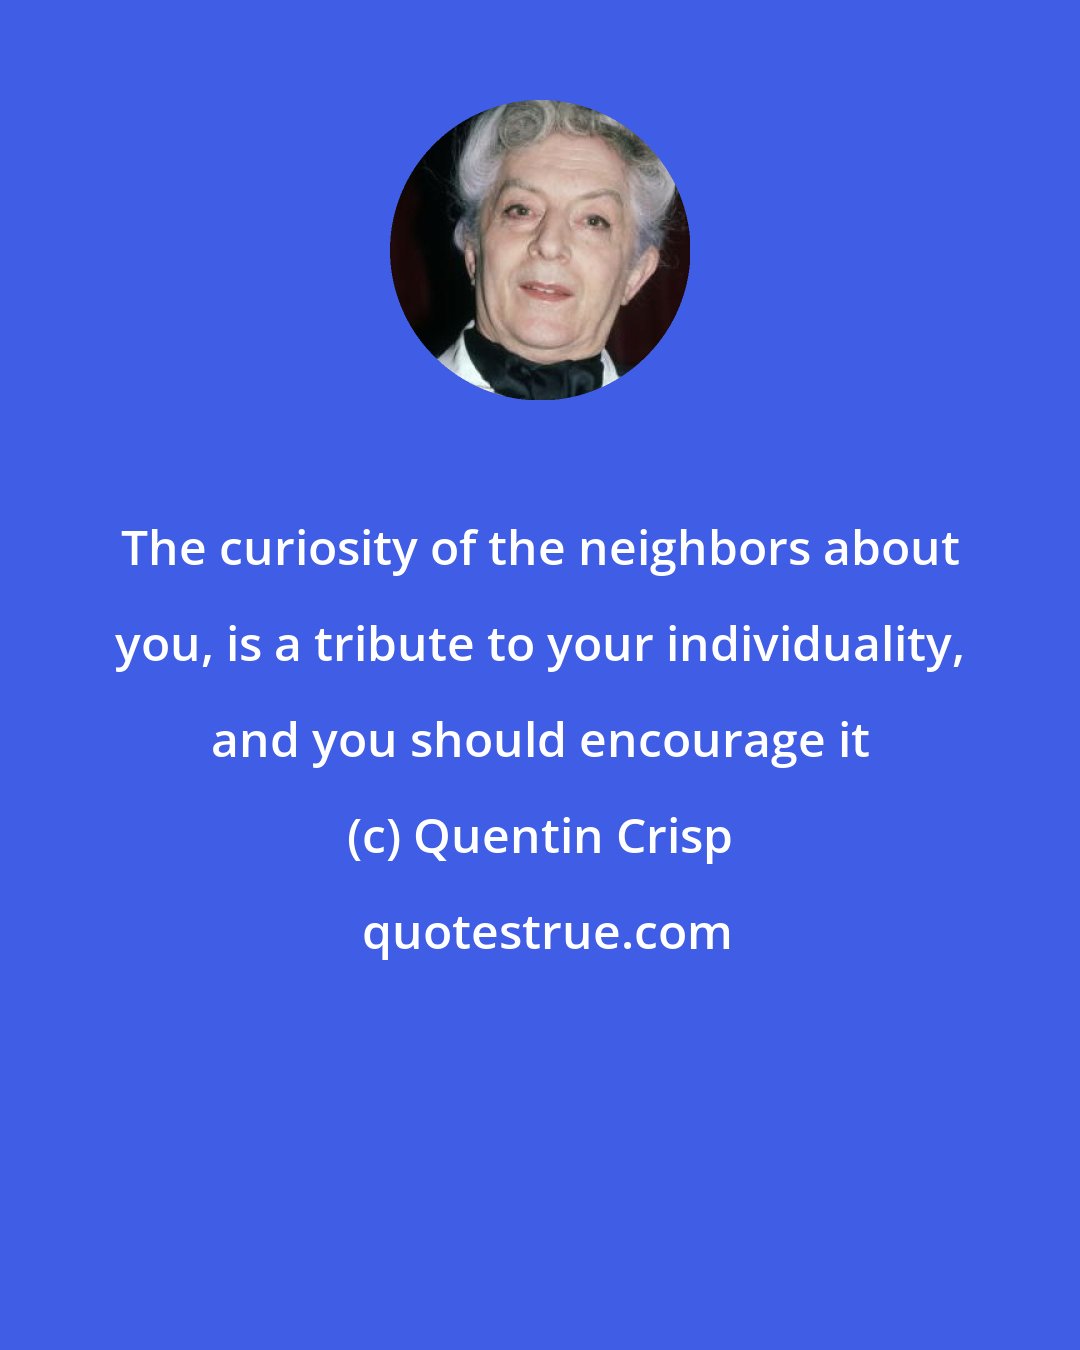 Quentin Crisp: The curiosity of the neighbors about you, is a tribute to your individuality, and you should encourage it